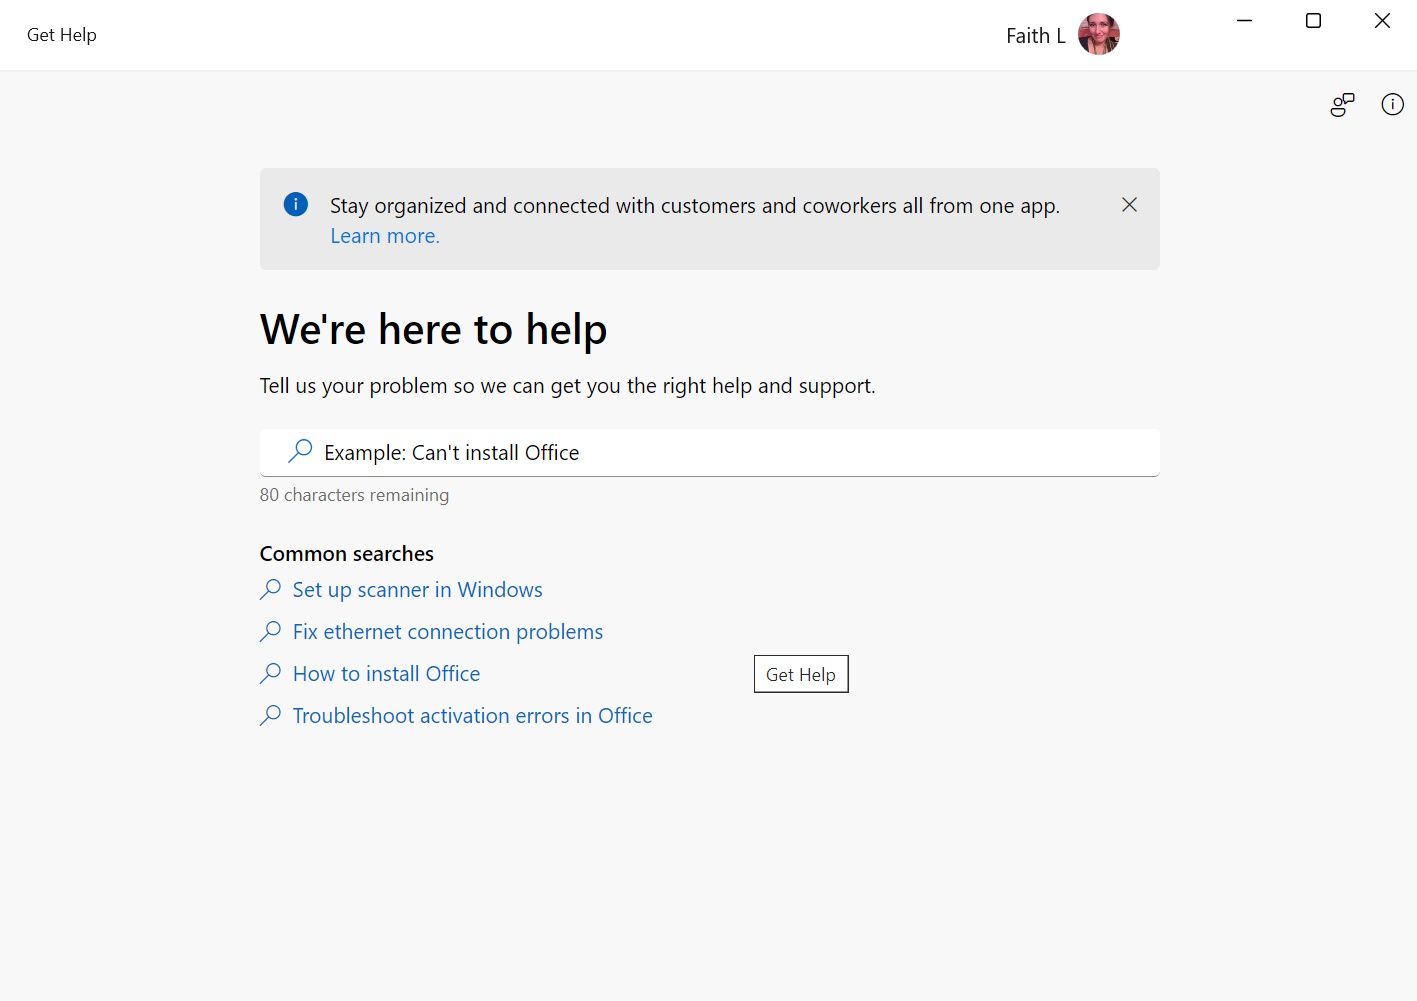 Home page of the Get Help Windows app